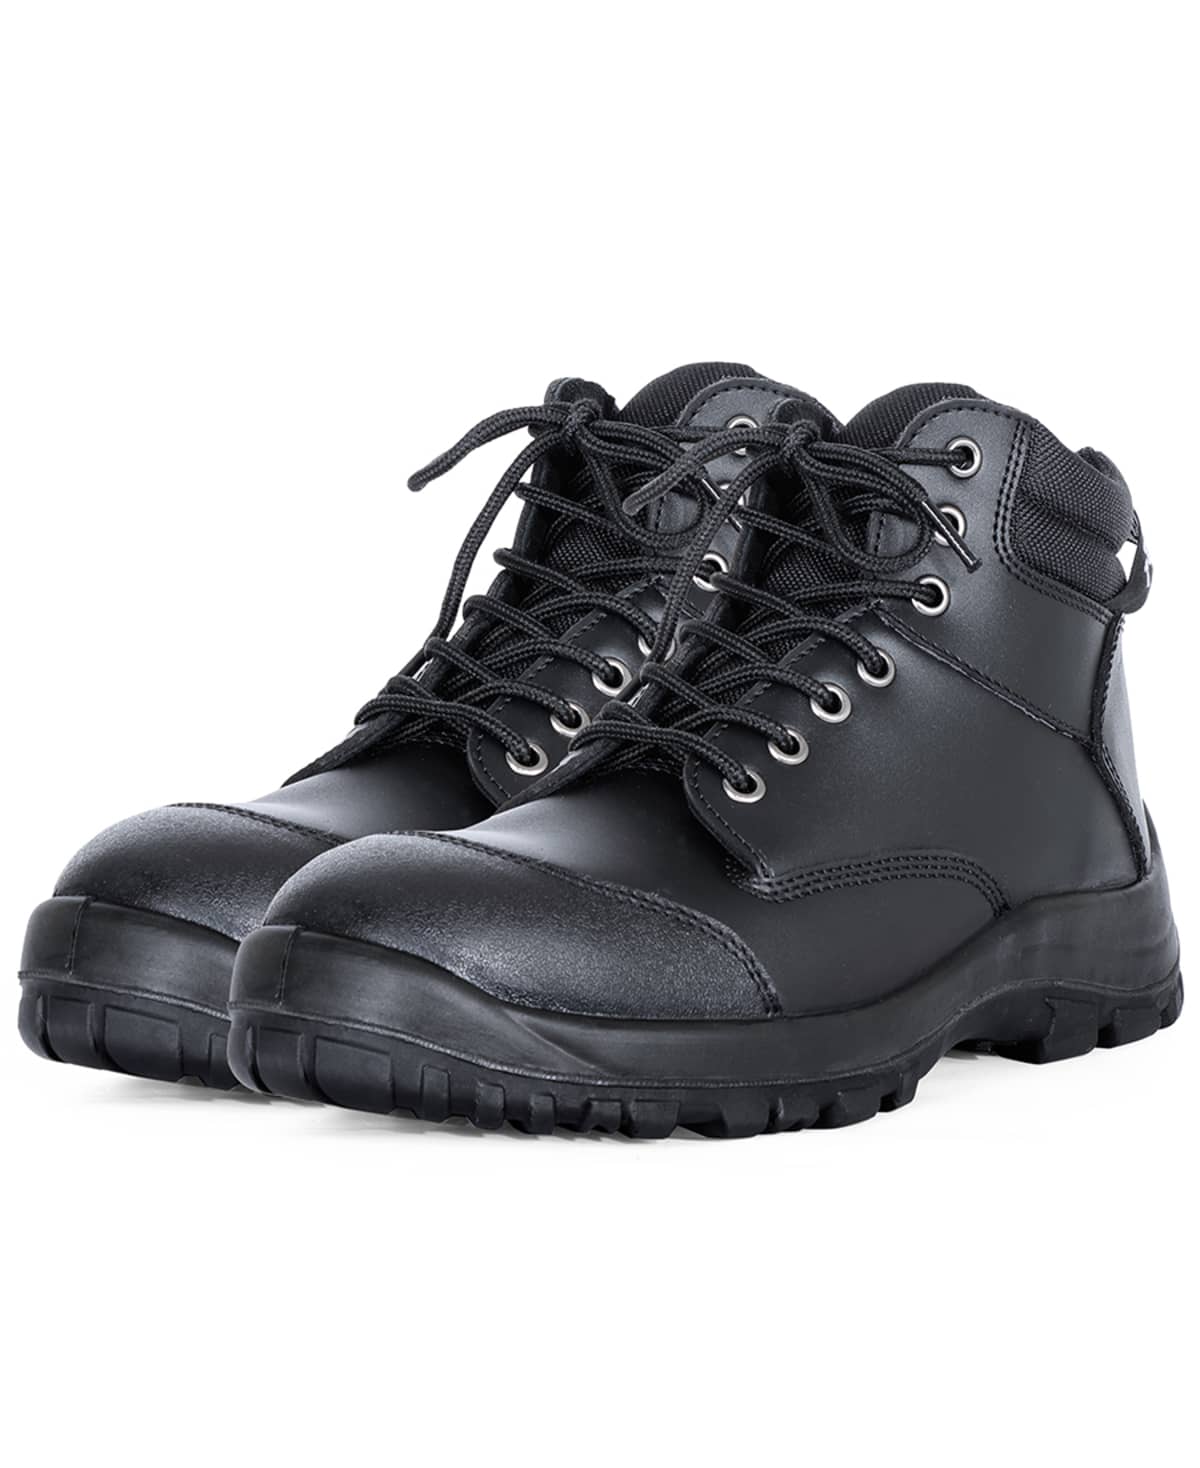 JB's Steeler Lace Up Safety Boot